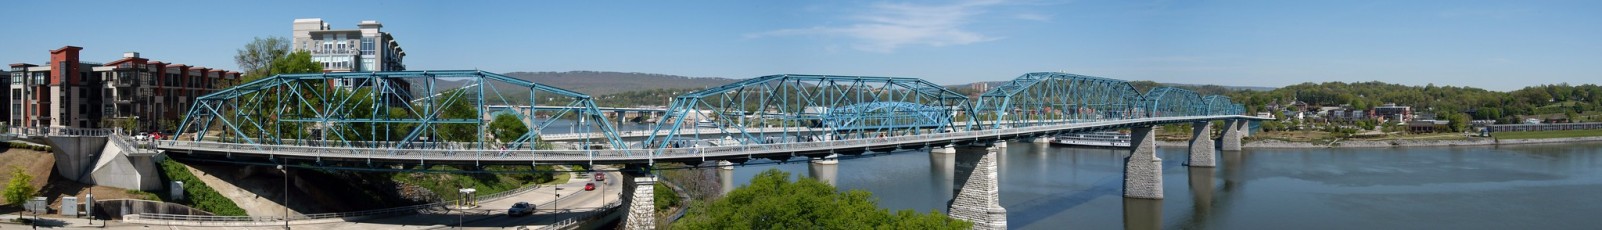 Tennessee River panorama